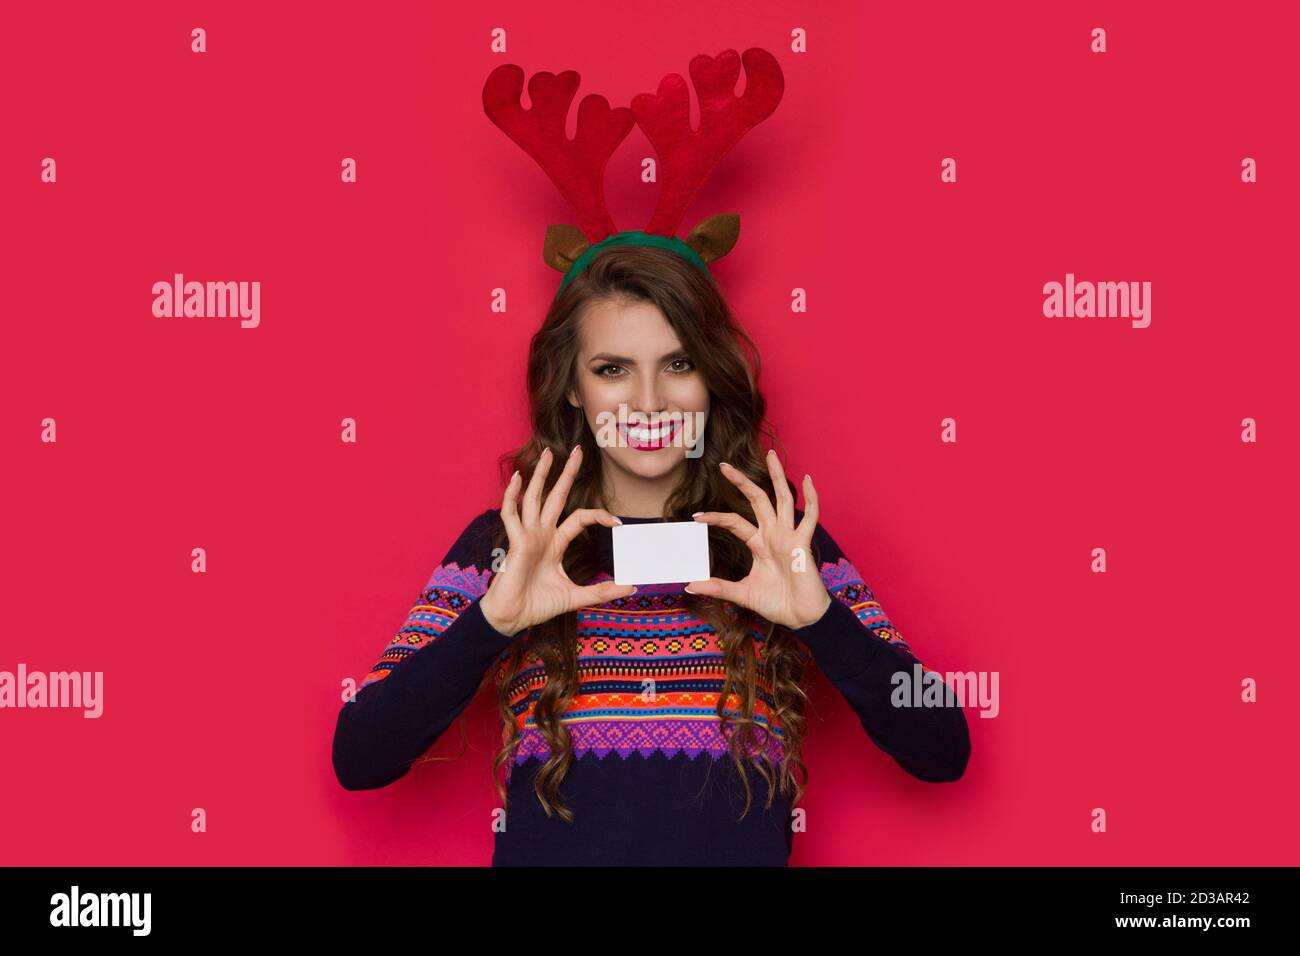 Smiling young woman in sweater with colorful pattern wearing christmas reindeer horns showing white card. Front view. Waist up studio shot on red back Stock Photo